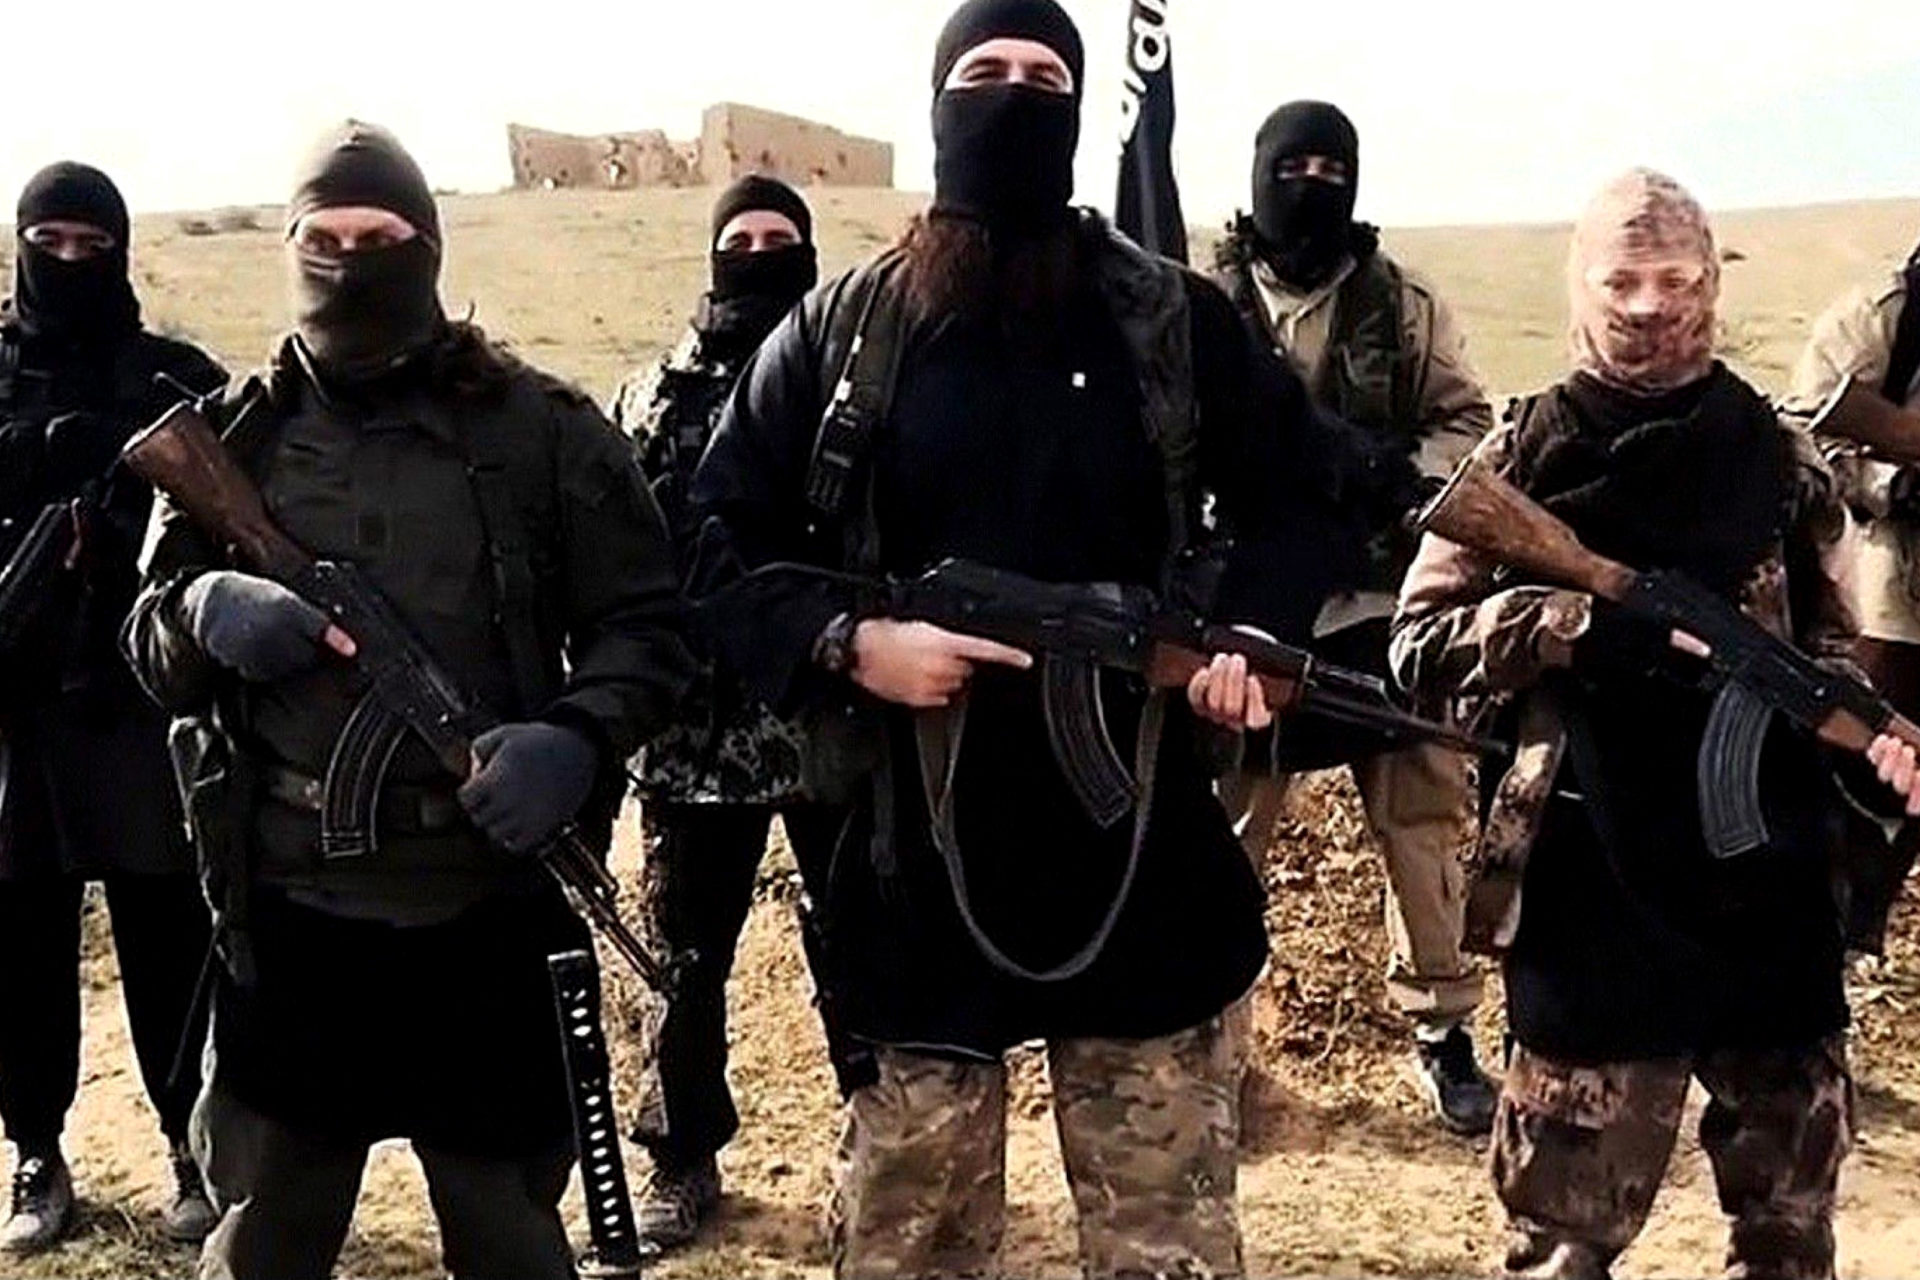 New ISIS "Kill List" Emerges - Want to Target Several US Cities